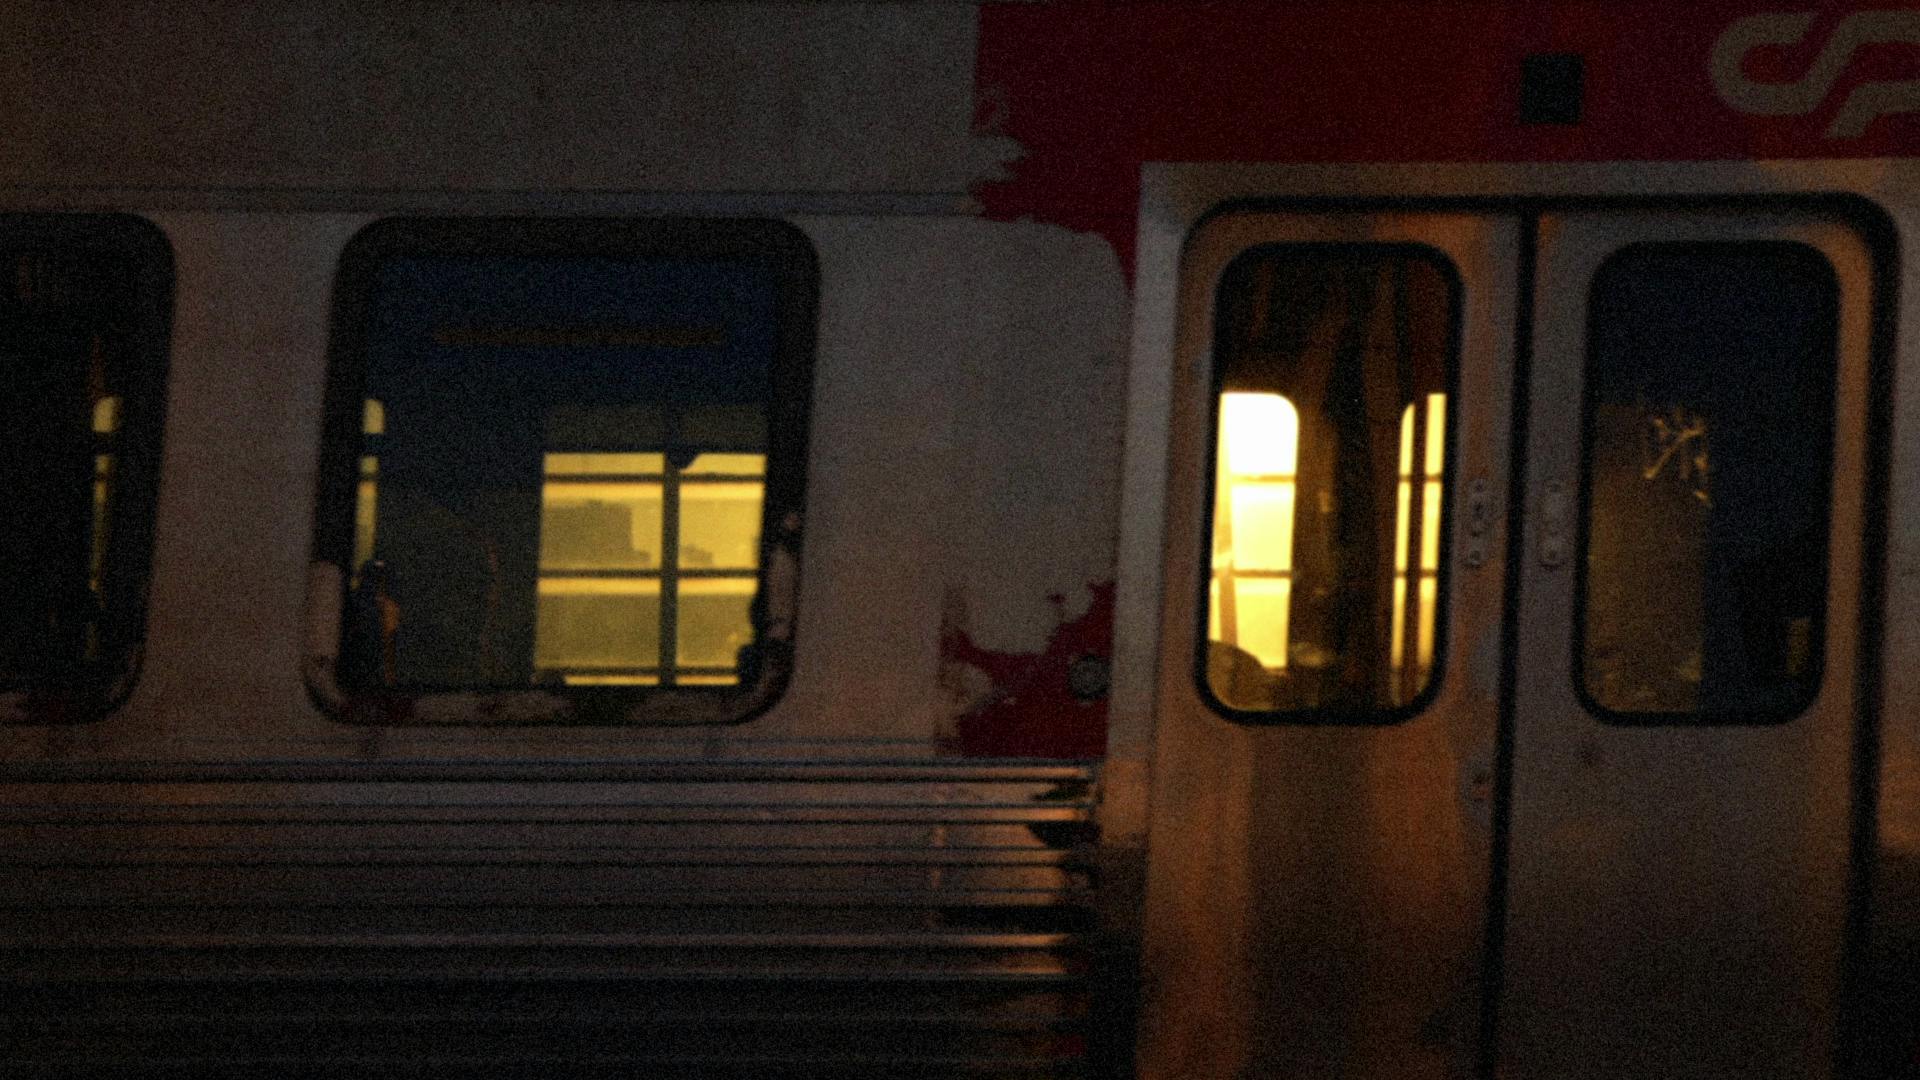 Still image of a passing train carriage from the music video for ATK by Bonobo